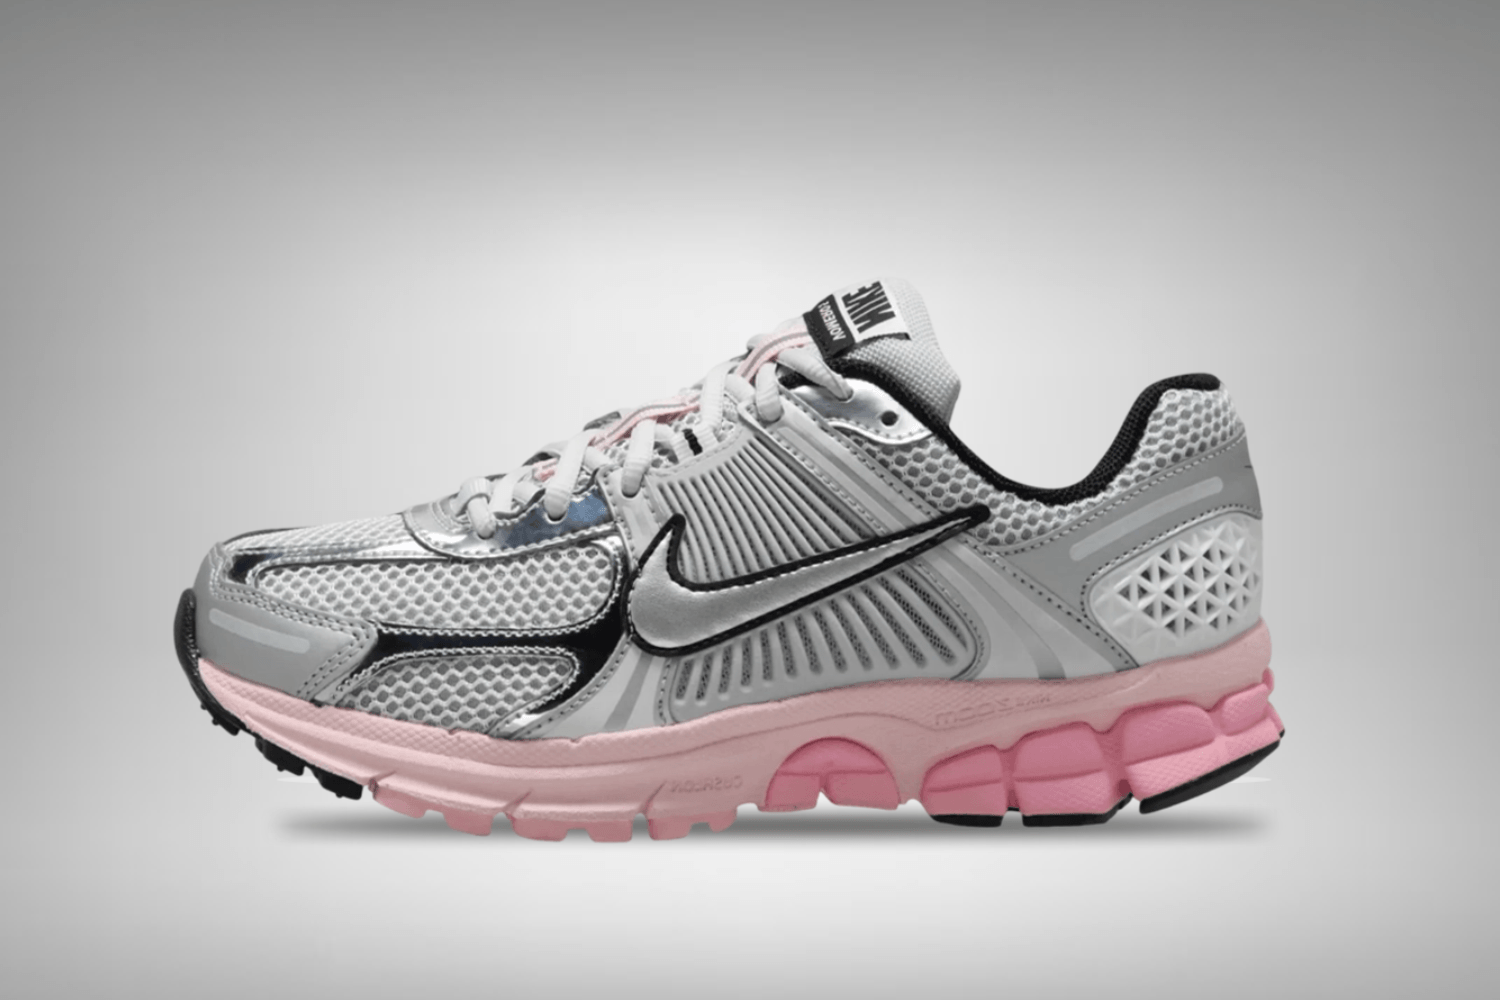 The Nike Zoom Vomero 5 arrives in a 'Pink Foam' colorway